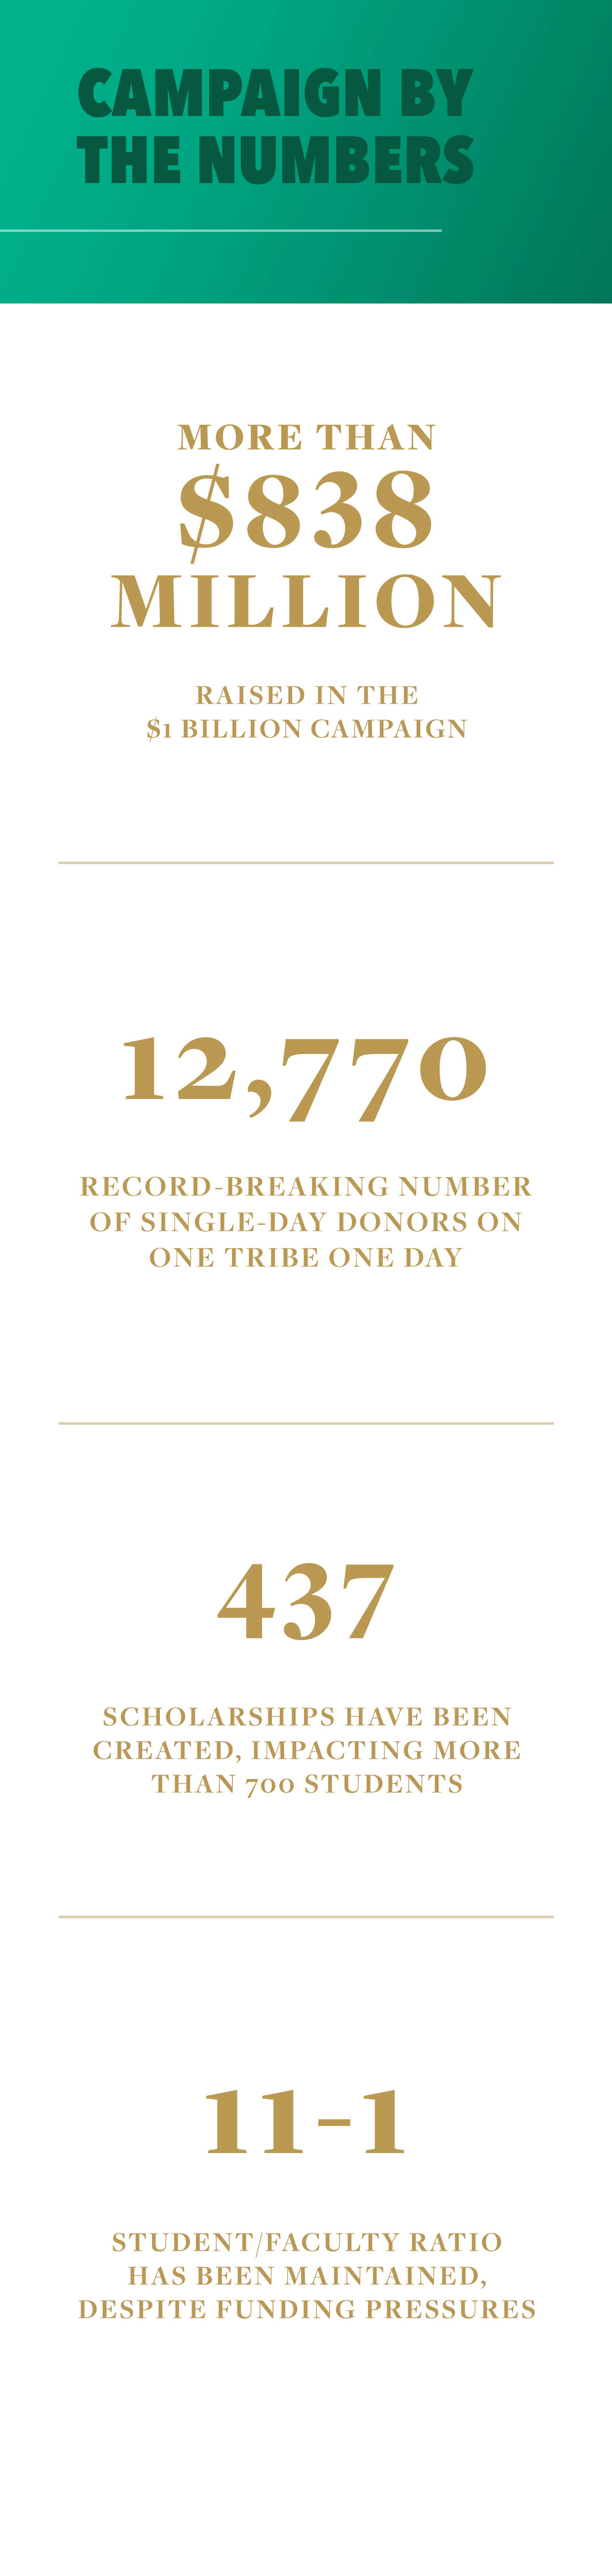 Campaign by the numbers. More than $838 Million raised in the $1 Billion Campaign. 12,770 record-breaking number of single-day donors on one tribe one day. 437 scholarships have been created, impacting more than 700 students. 11-1 student faculty ration has been maintained, despite funding pressures.